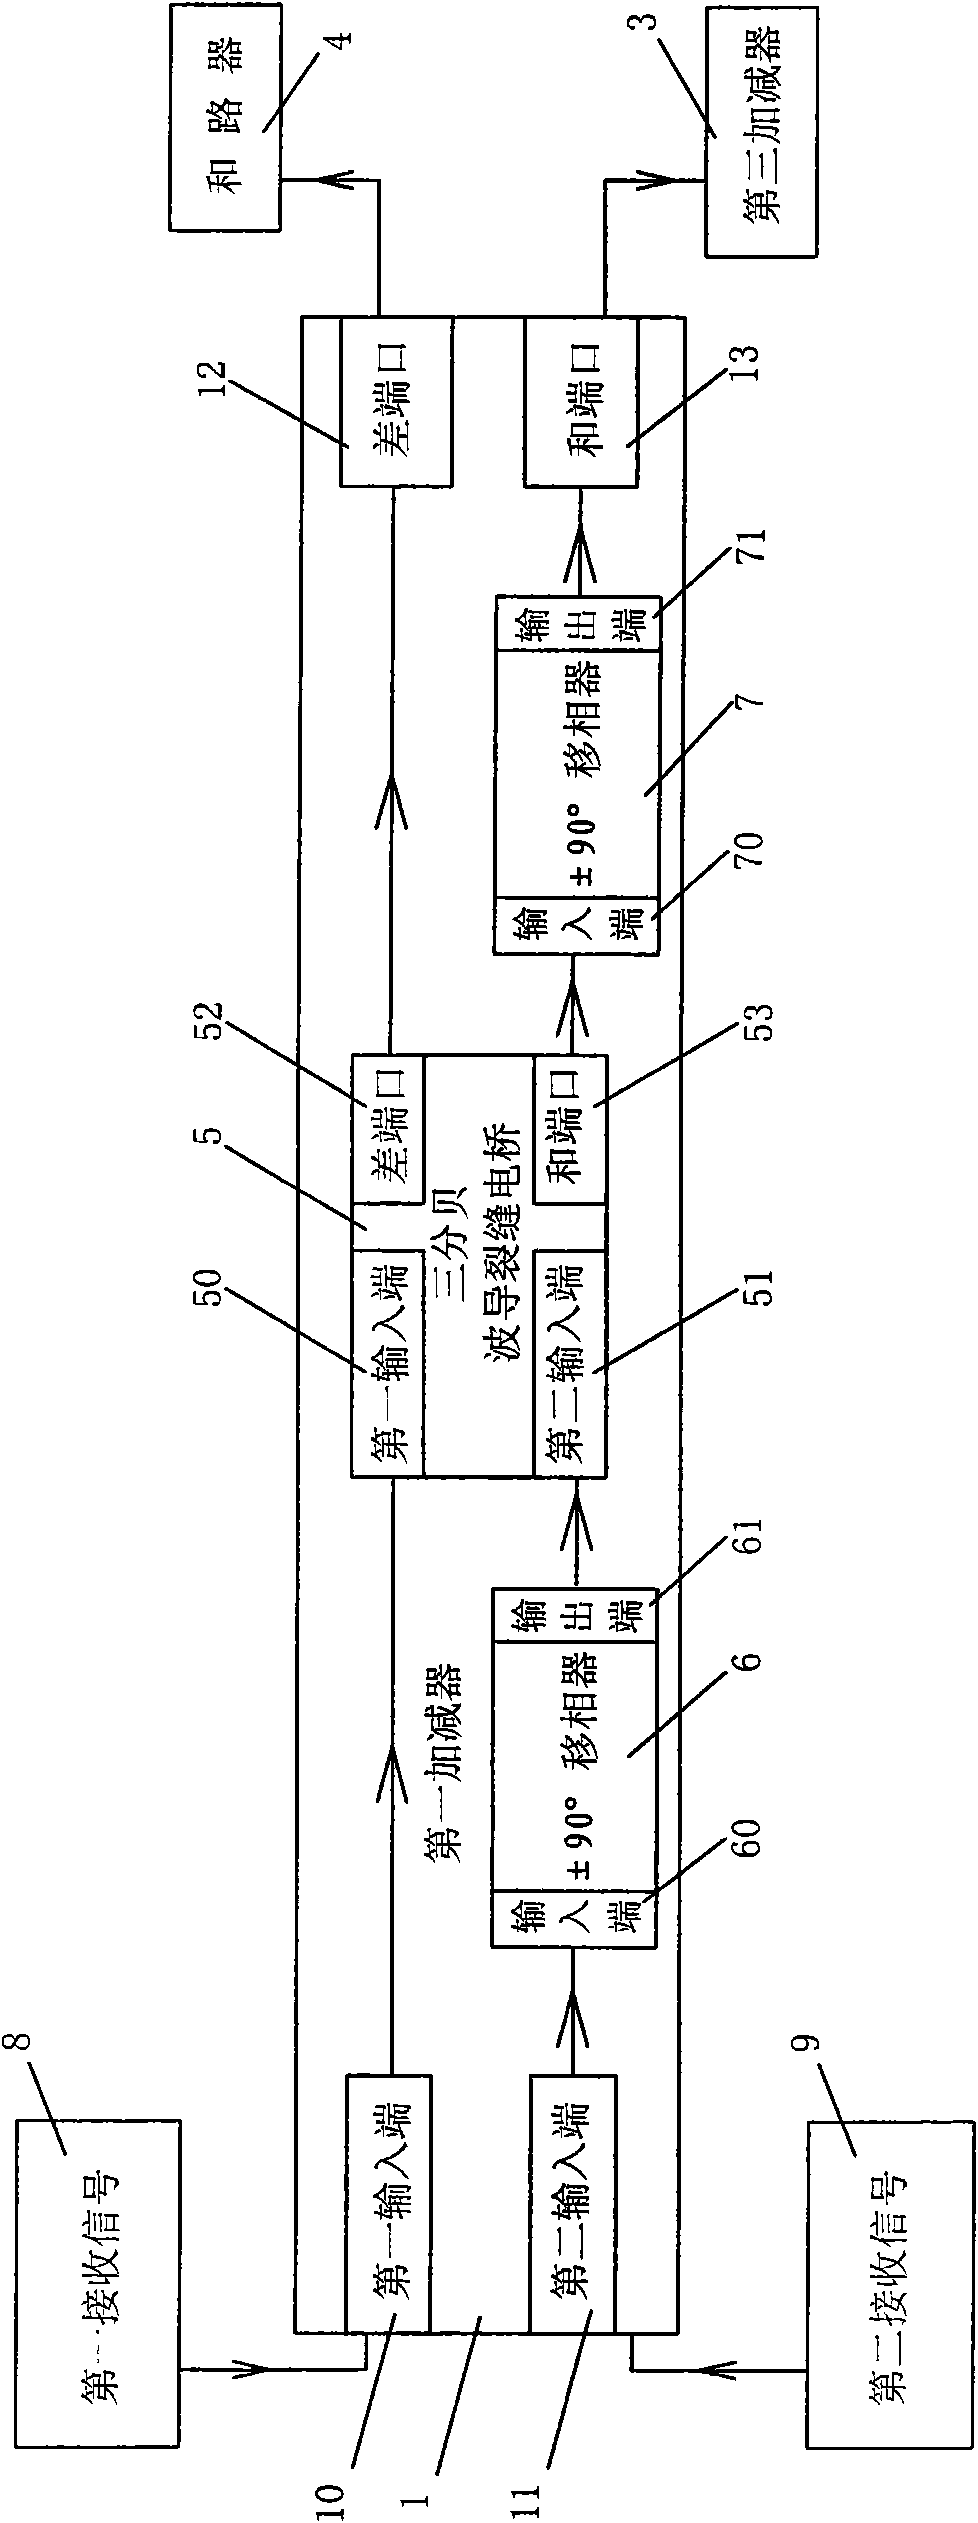 Planar waveguide sum-and-difference network